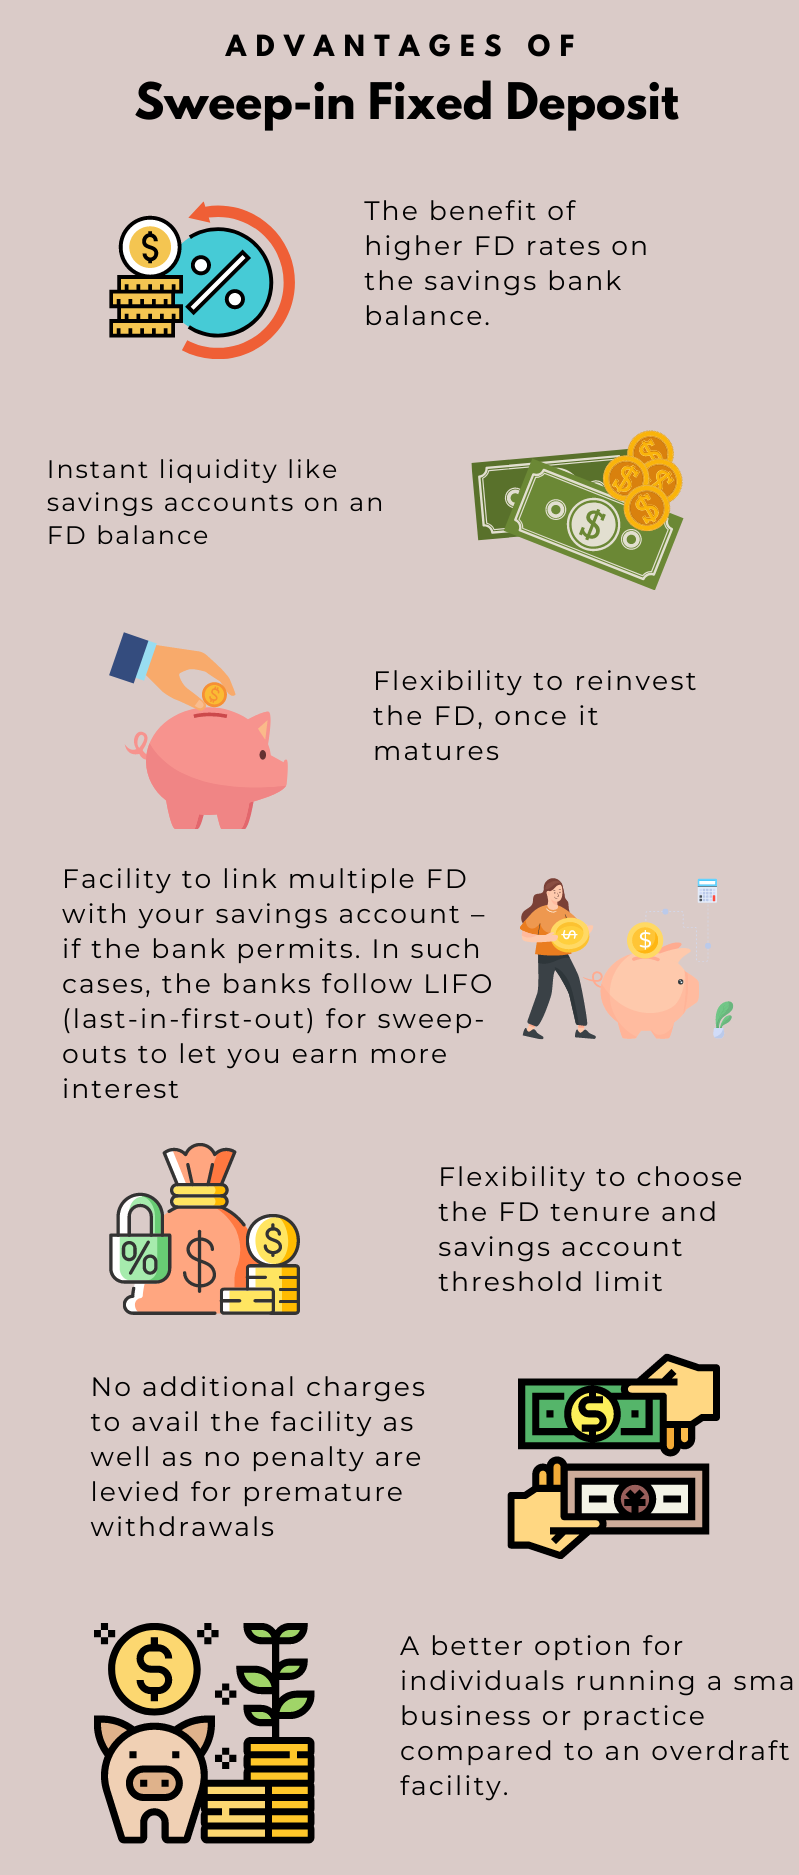 Everything You Wanted to About the Fixed Deposit Sweep in Facility